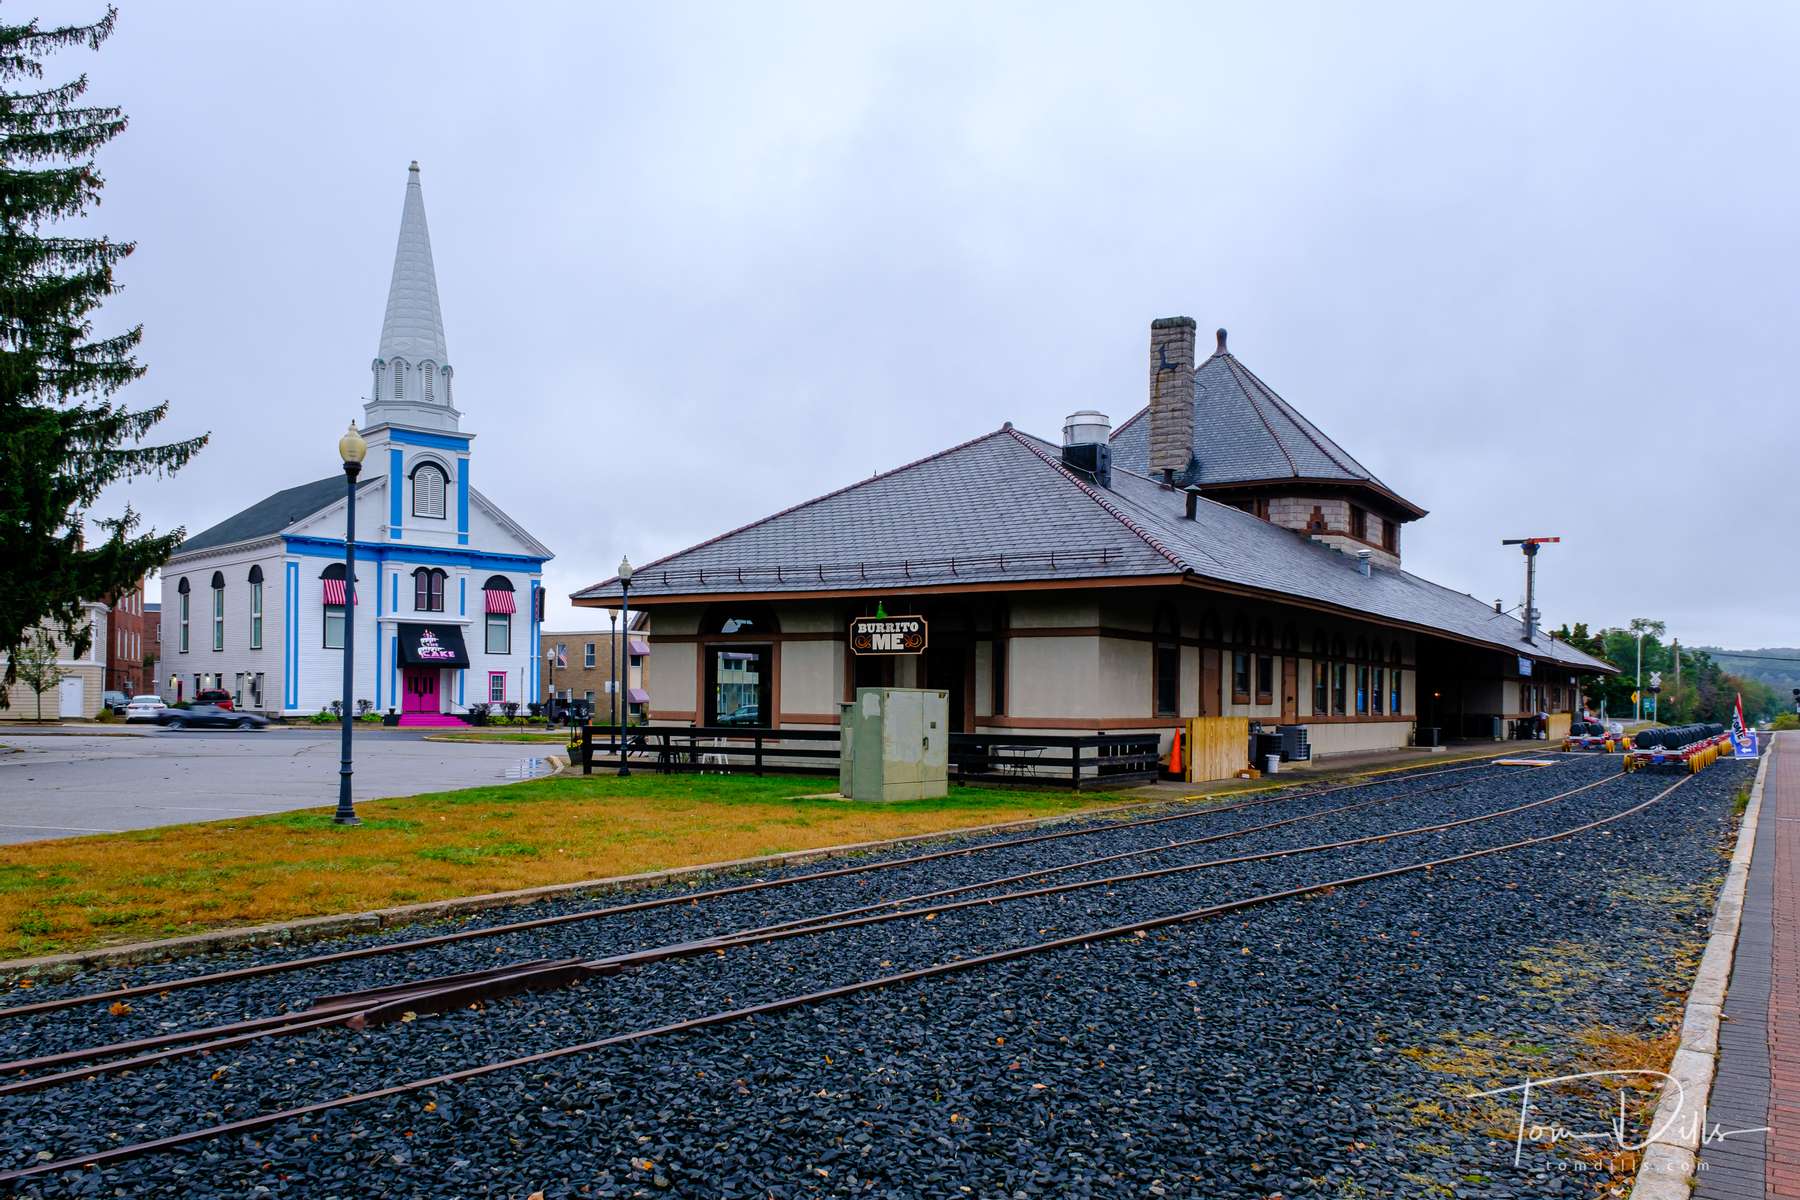 Train station in Laconia, New Hampshire.  Currently houses restaurants and a Rail Bike business